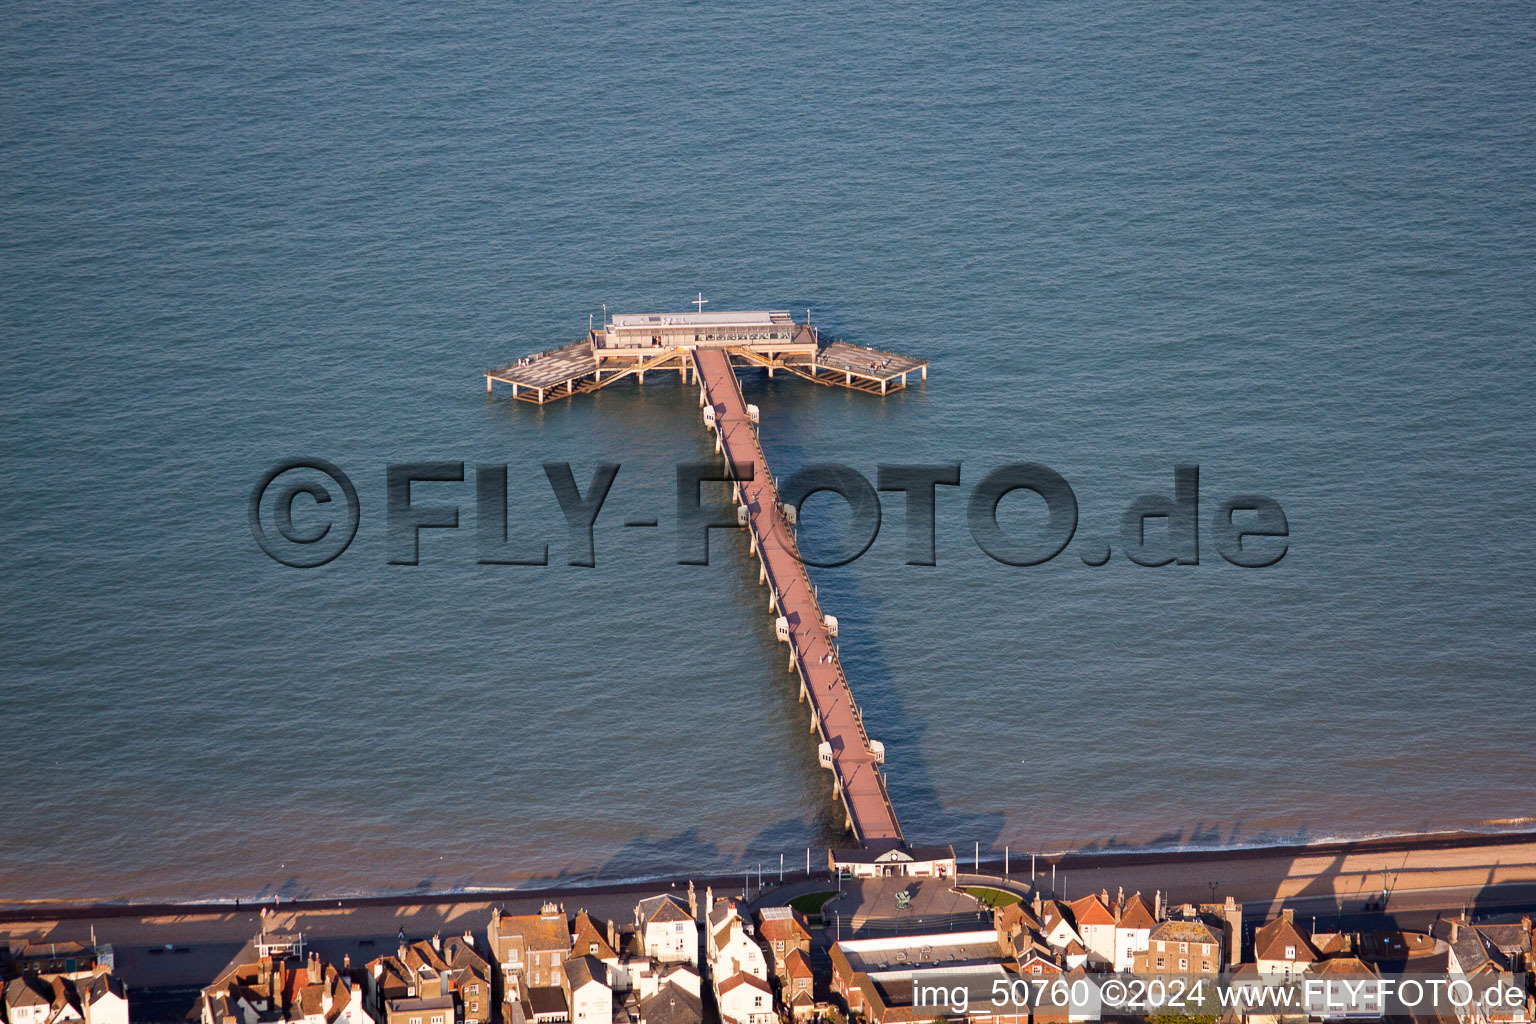 Aerial view of Sand and beach landscape on the pier of channel in Deal in England, United Kingdom